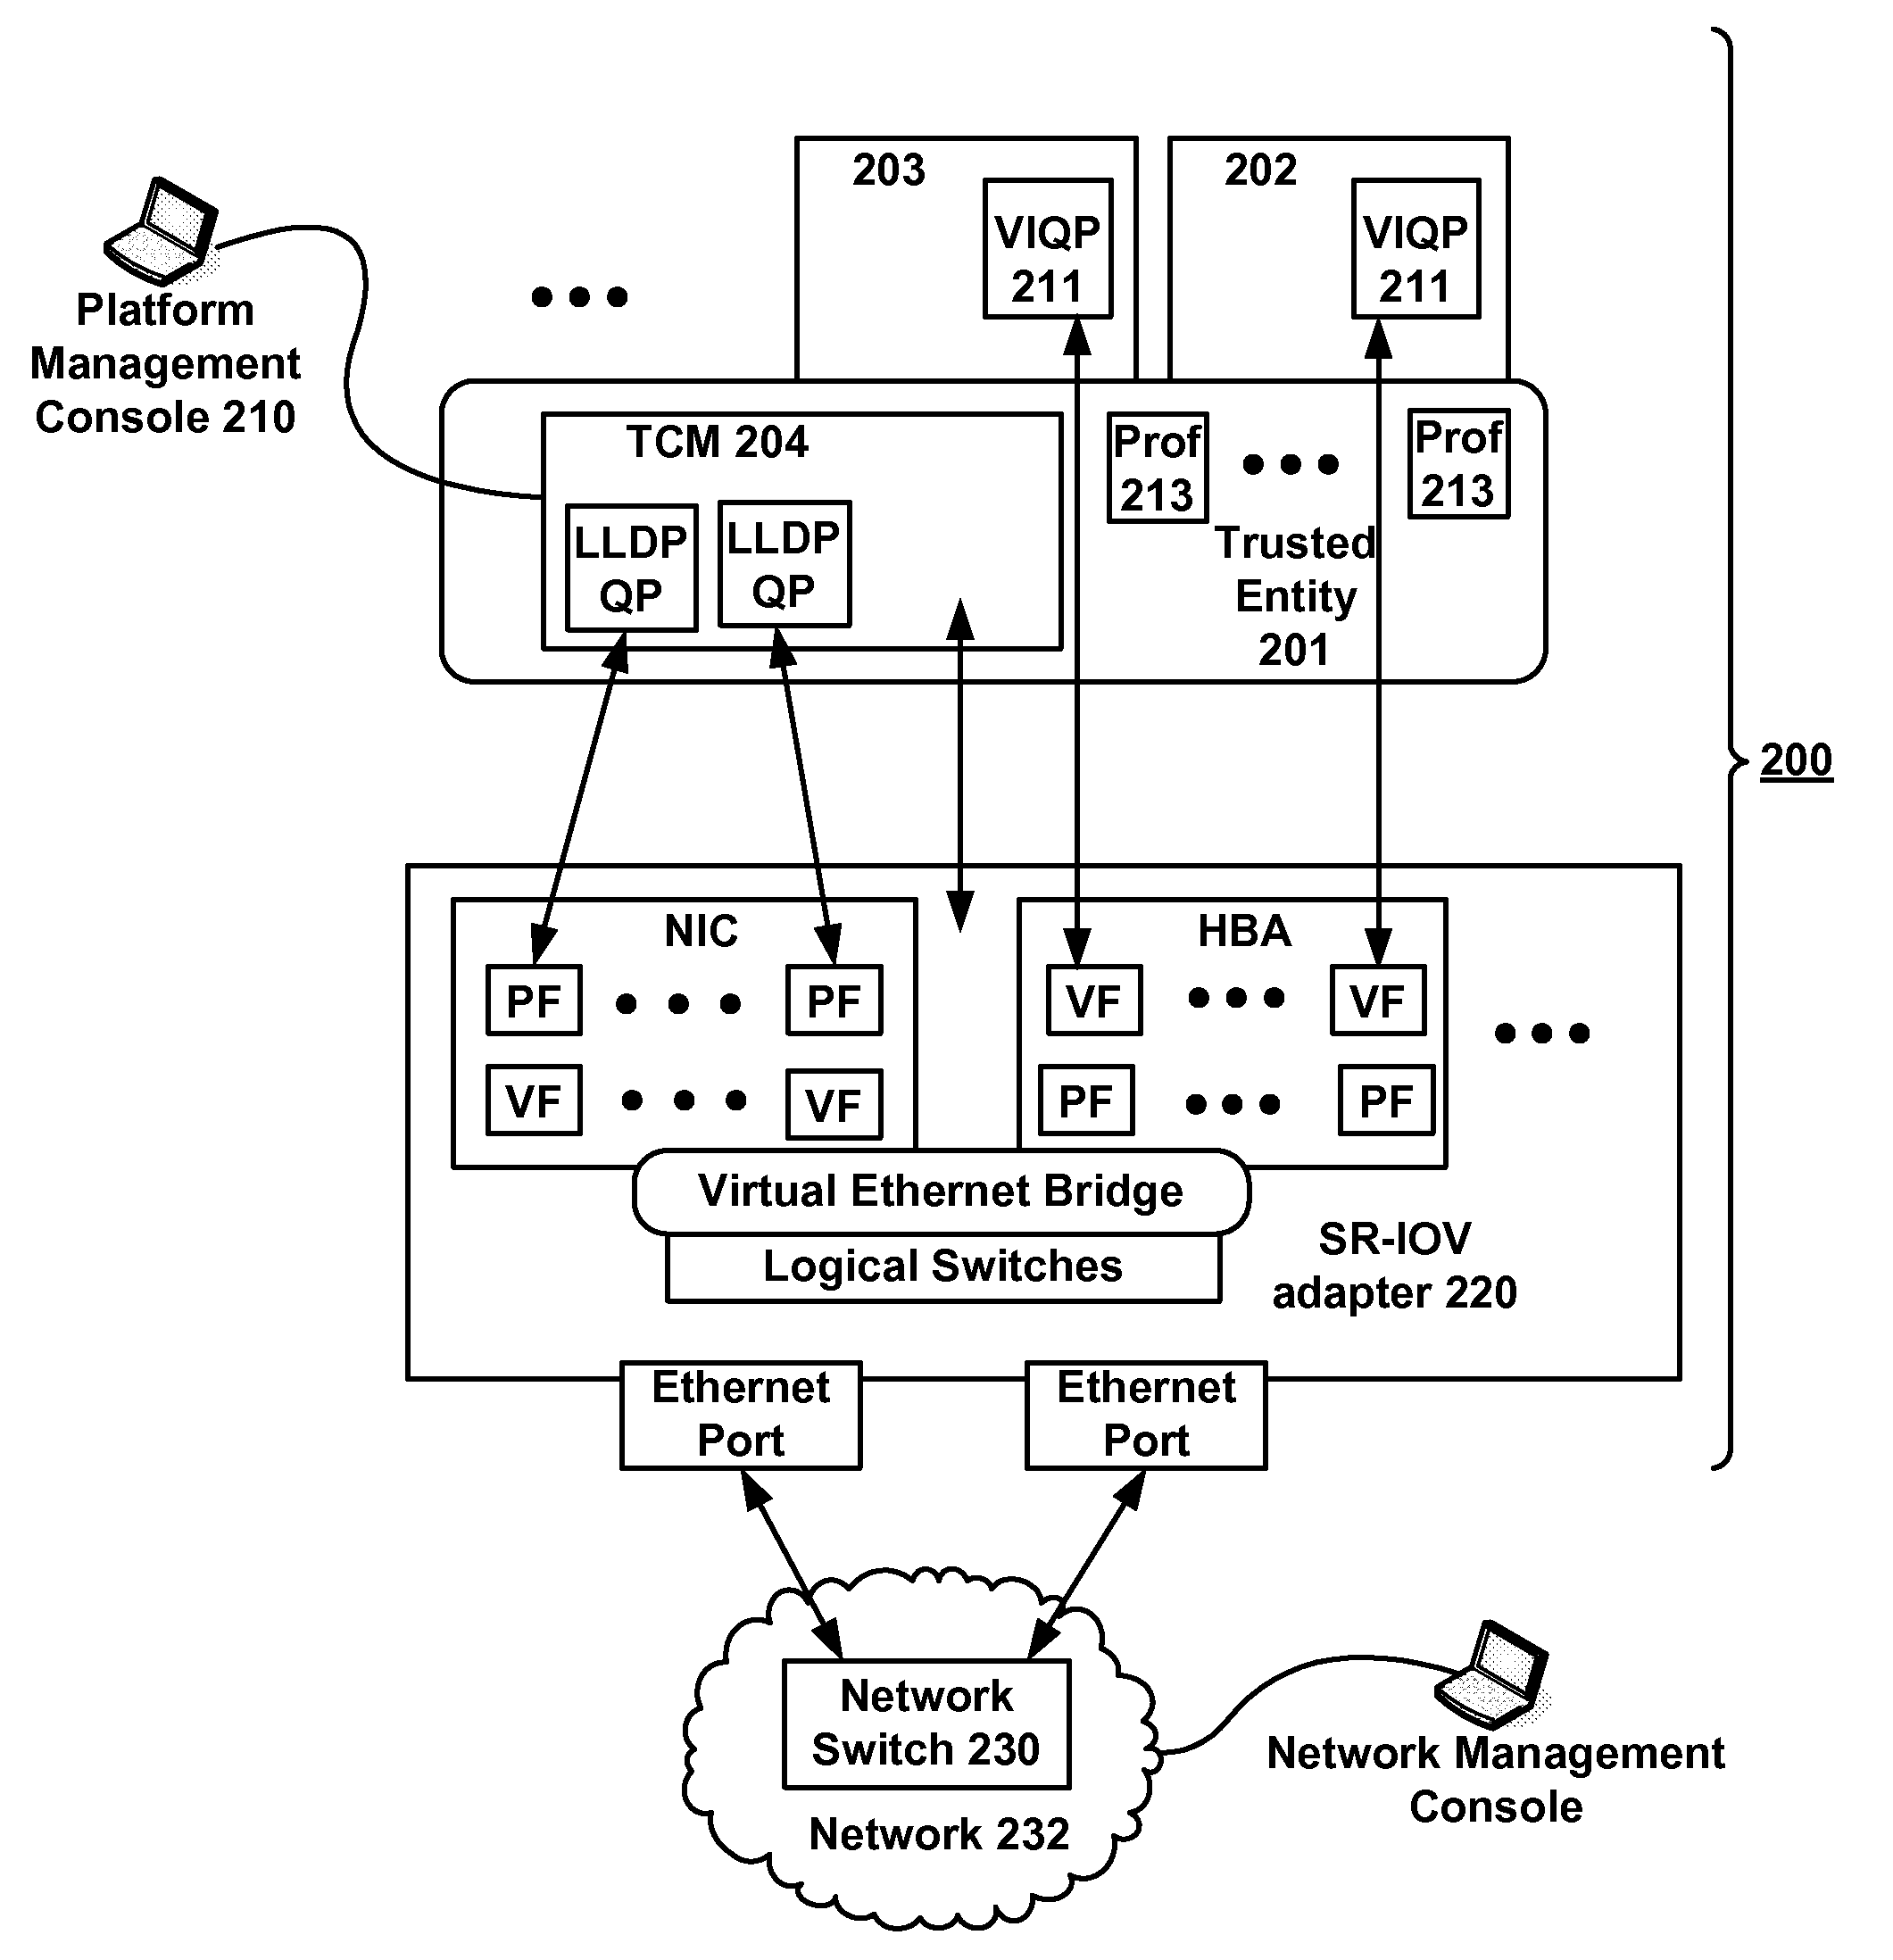 Discovery and Capability Exchange Management in a Virtualized Computing Platform Utilizing a SR-IOV Adapter